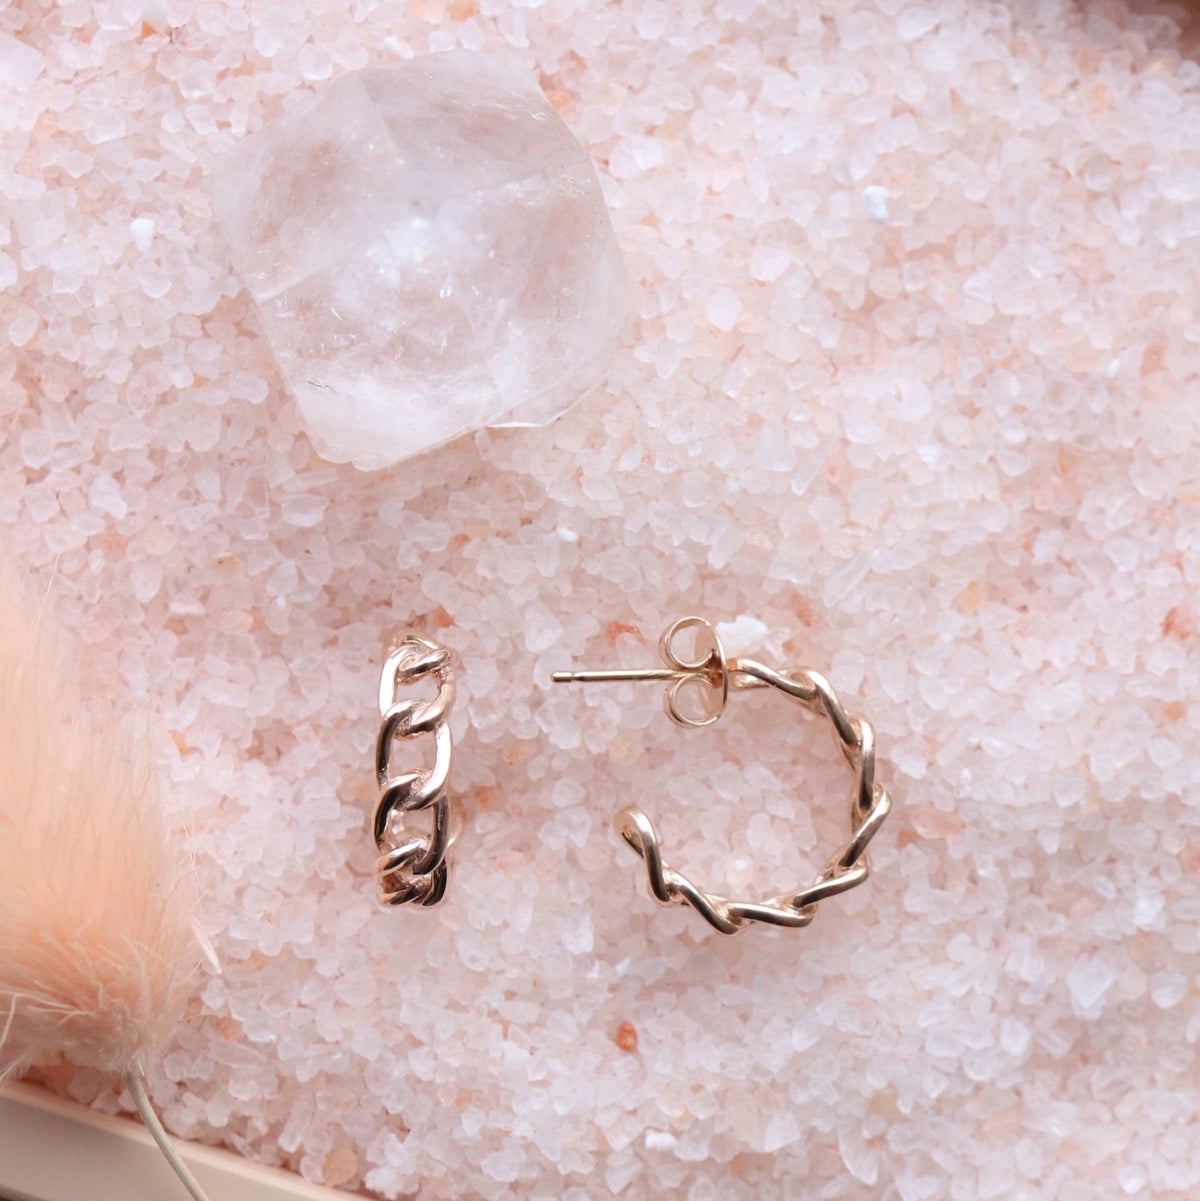 POISE CABLE LINK HUGGIE HOOPS - ROSE GOLD - SO PRETTY CARA COTTER